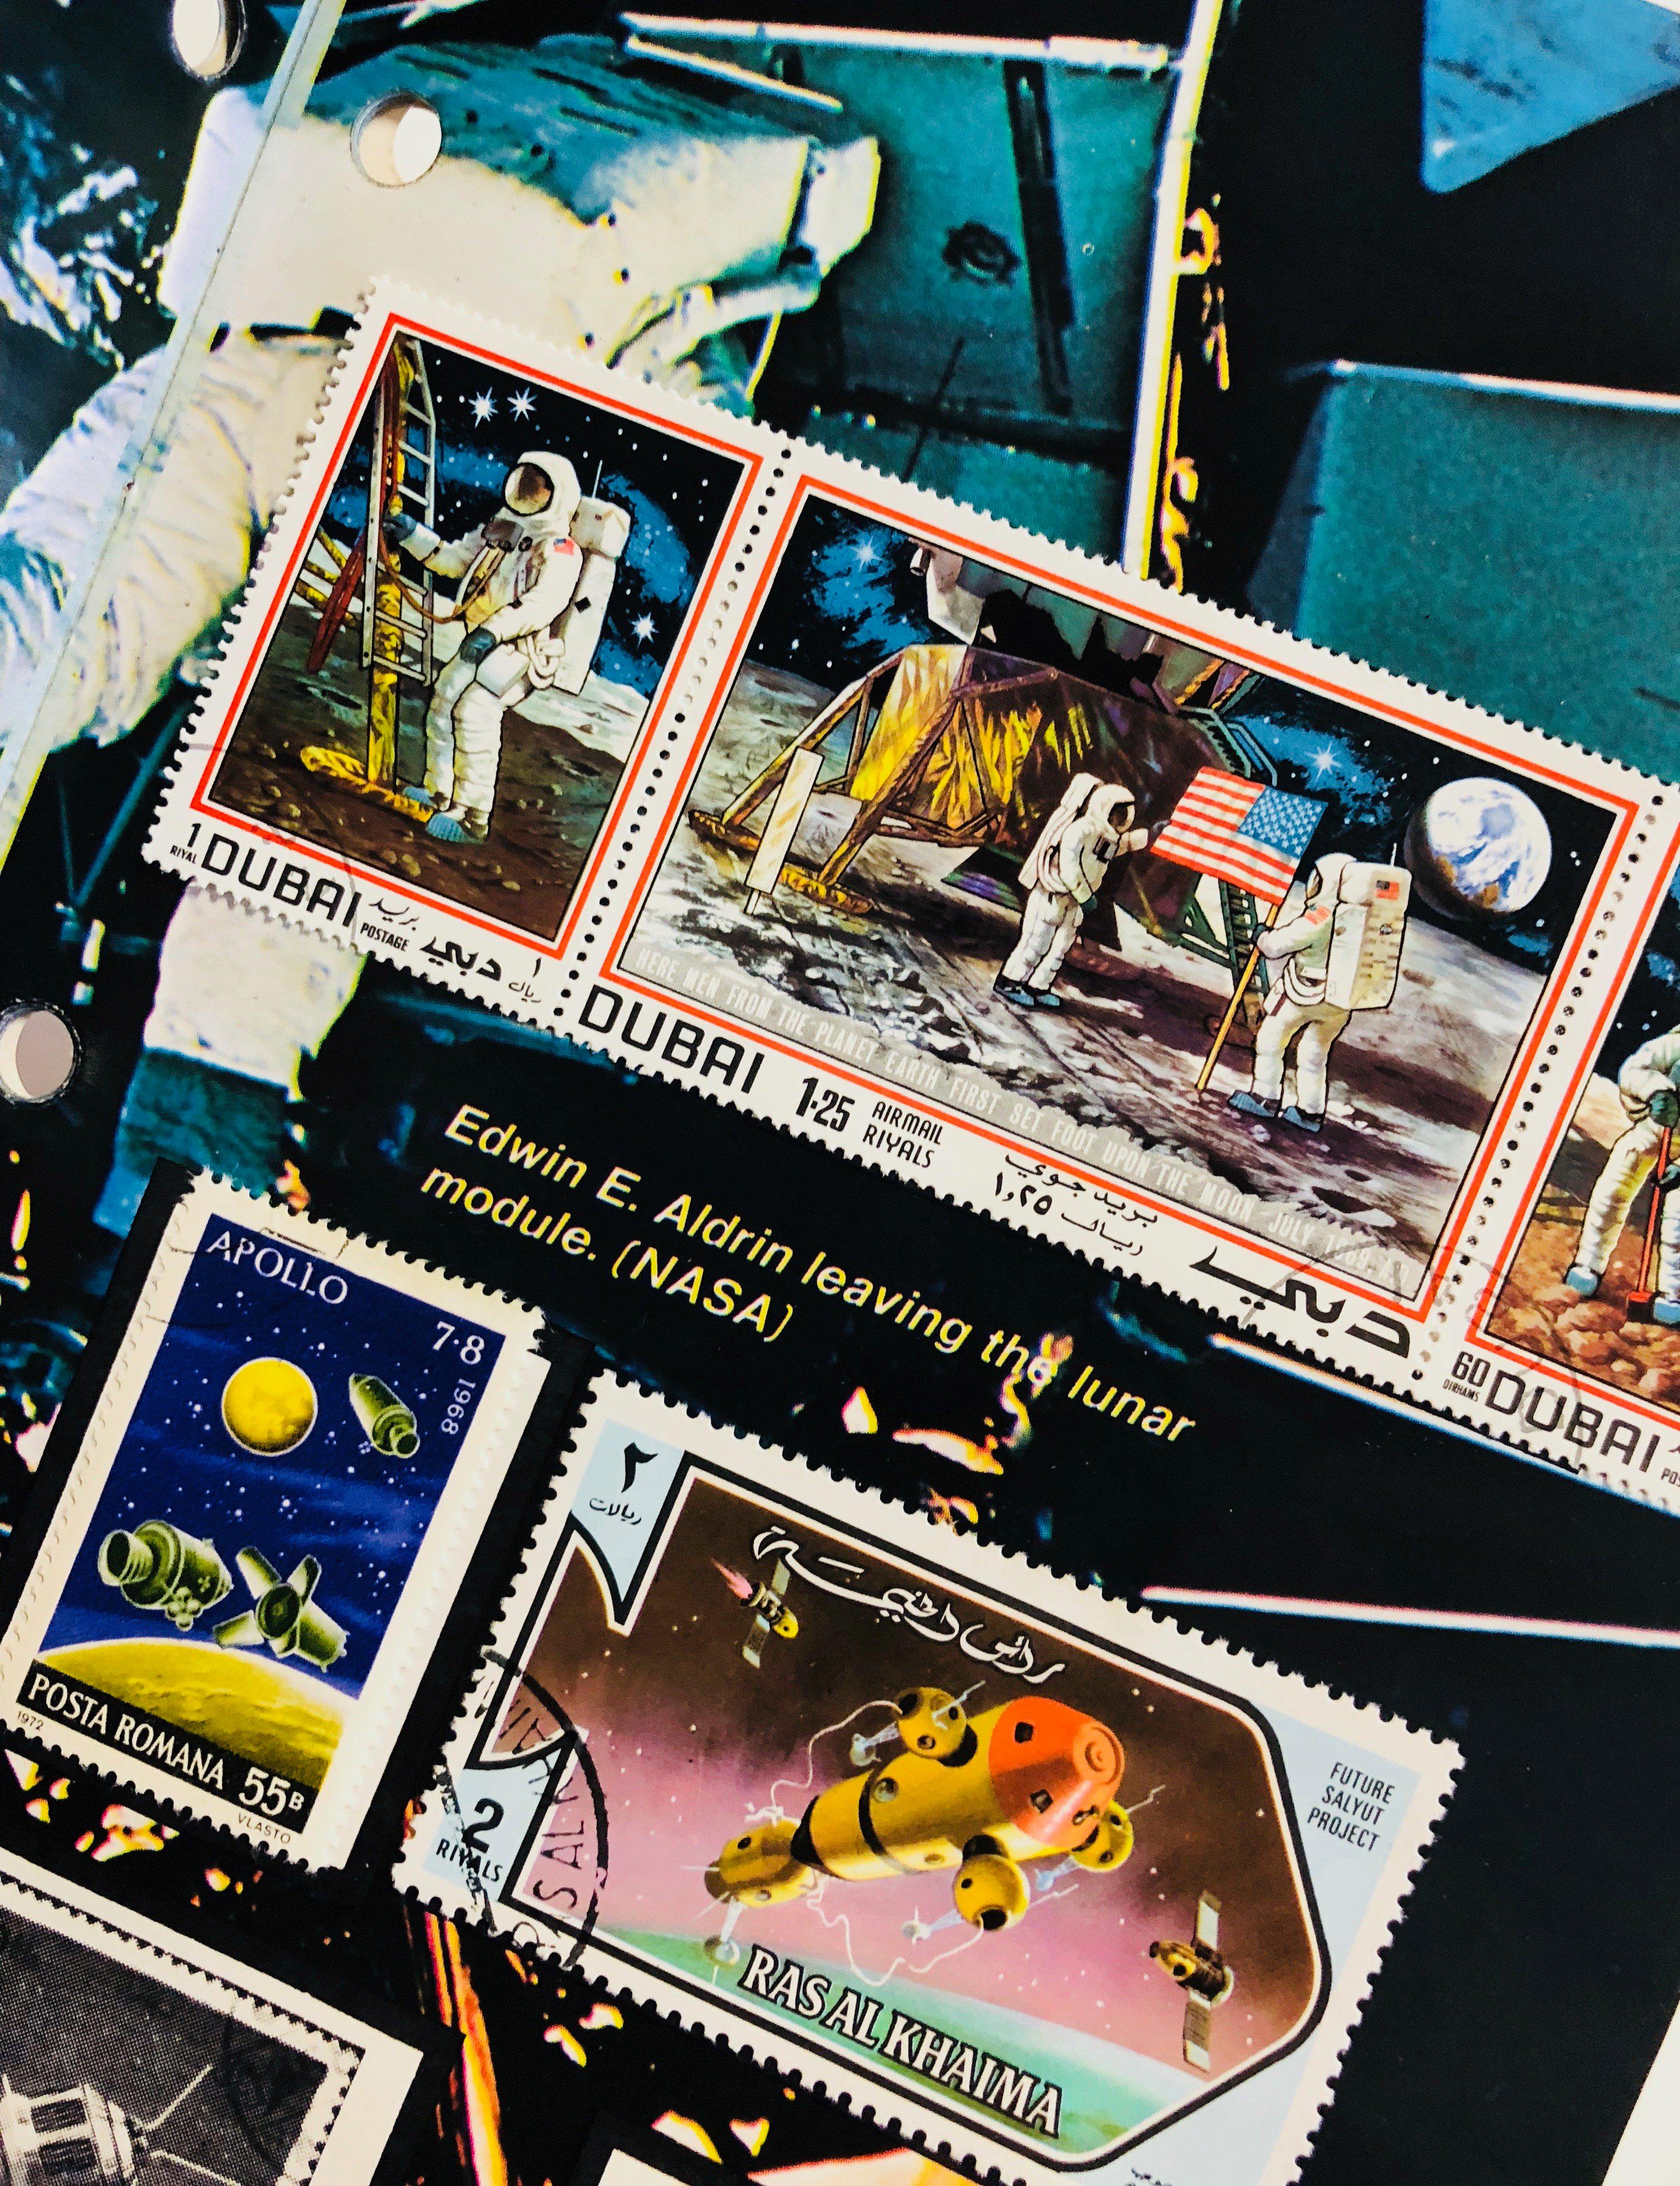 TWO Space Stamp Albums (1970's) Filled with Stamps - APOLLO - MOON LANDING